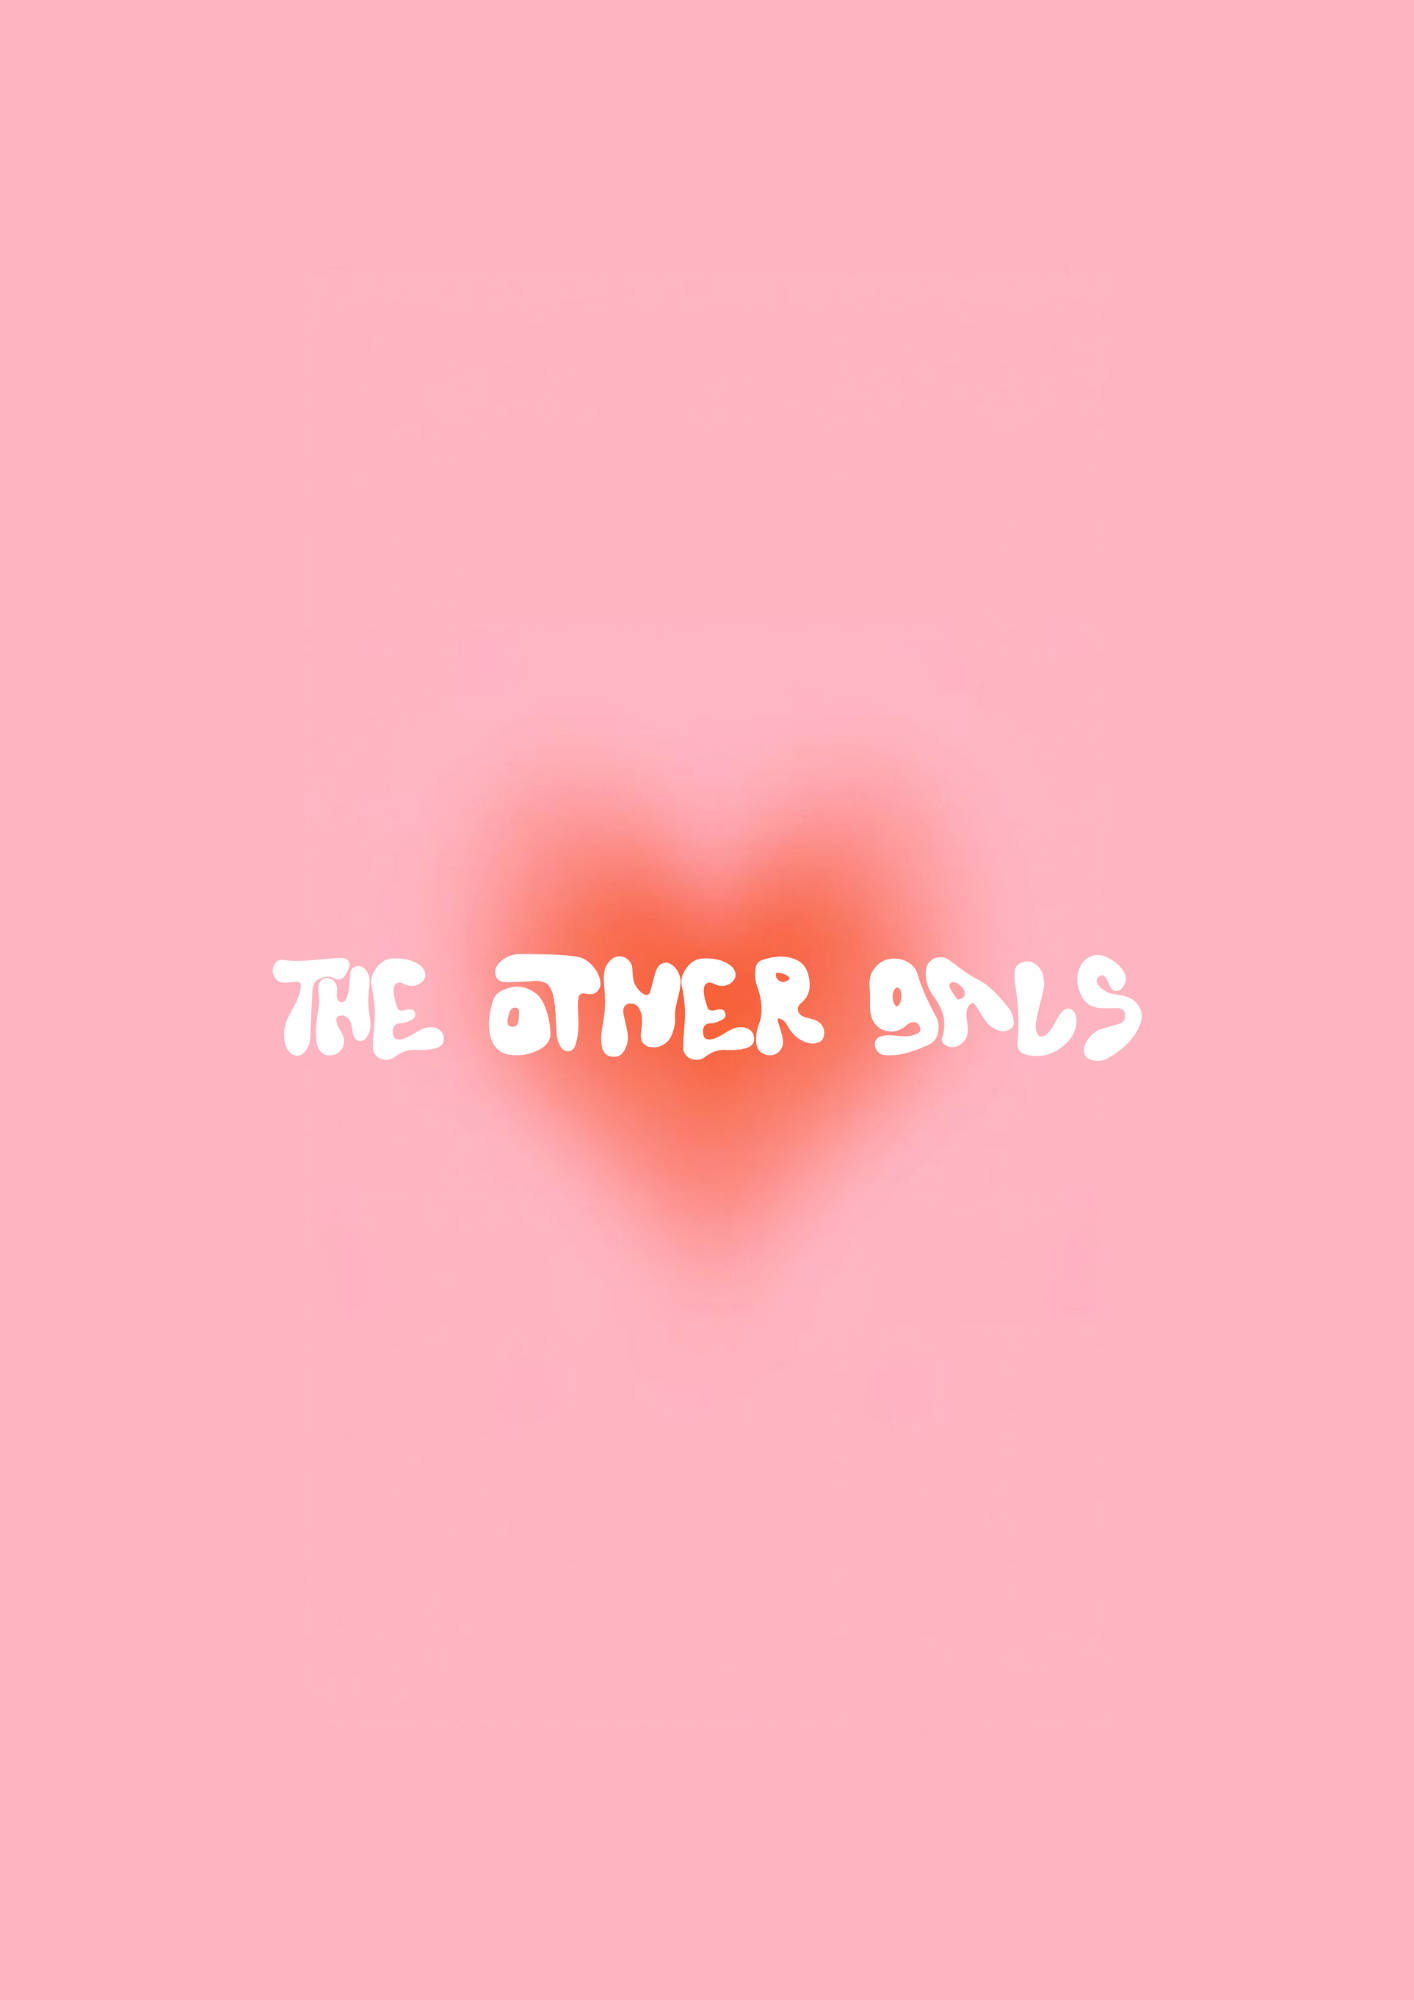 The Other Gals Logo by Louella Violet, showing The Other Gals written on a pink and red aura background.